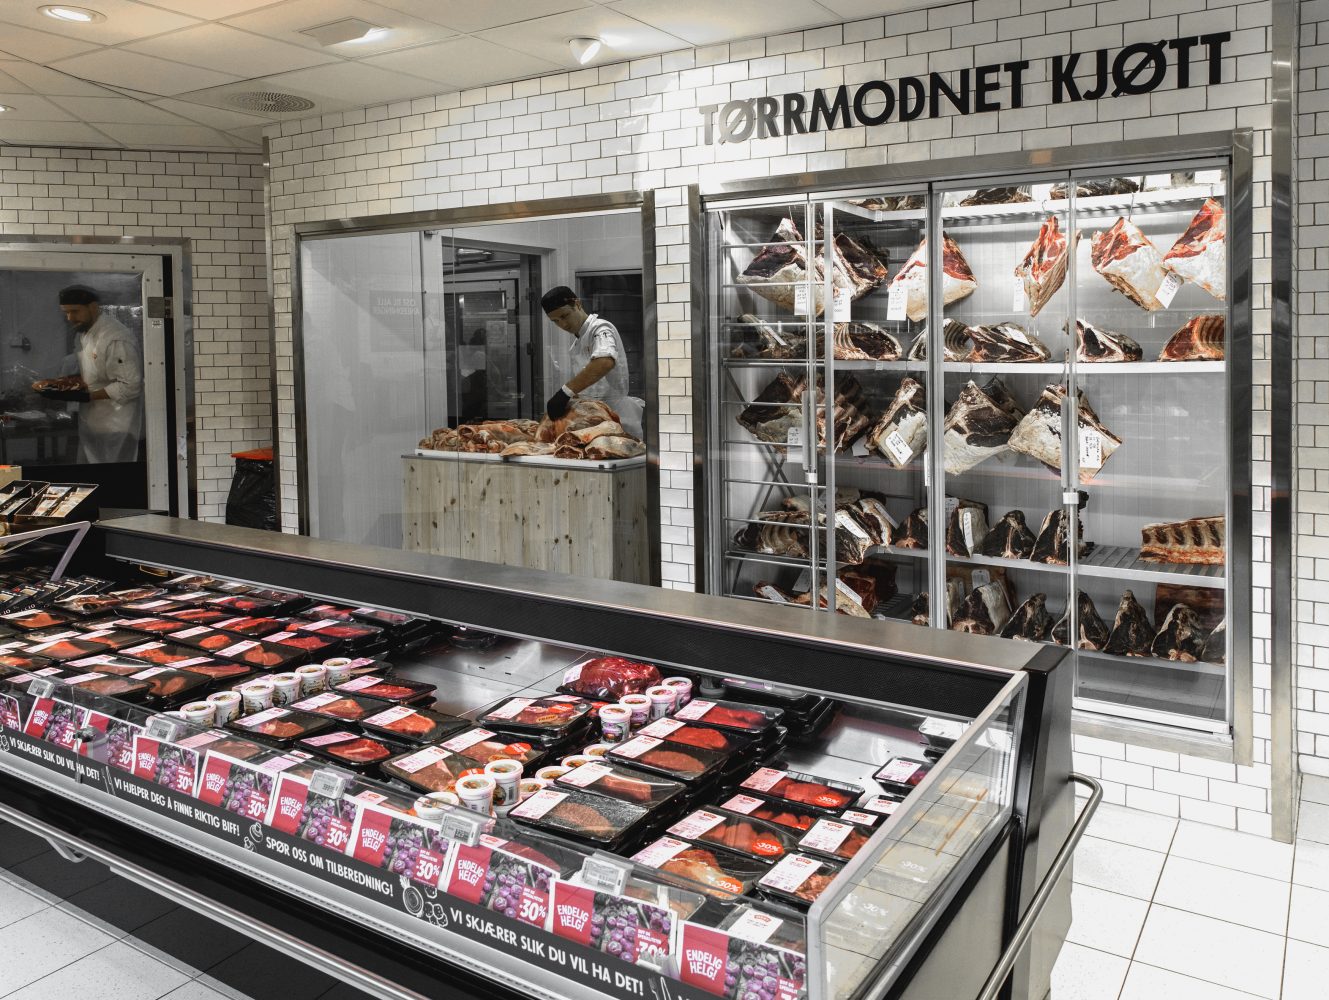 Supermarket-project-fresh-produce-meny-store-format-cc vest-oslo-counter-space-expert-butcher-meat-curing